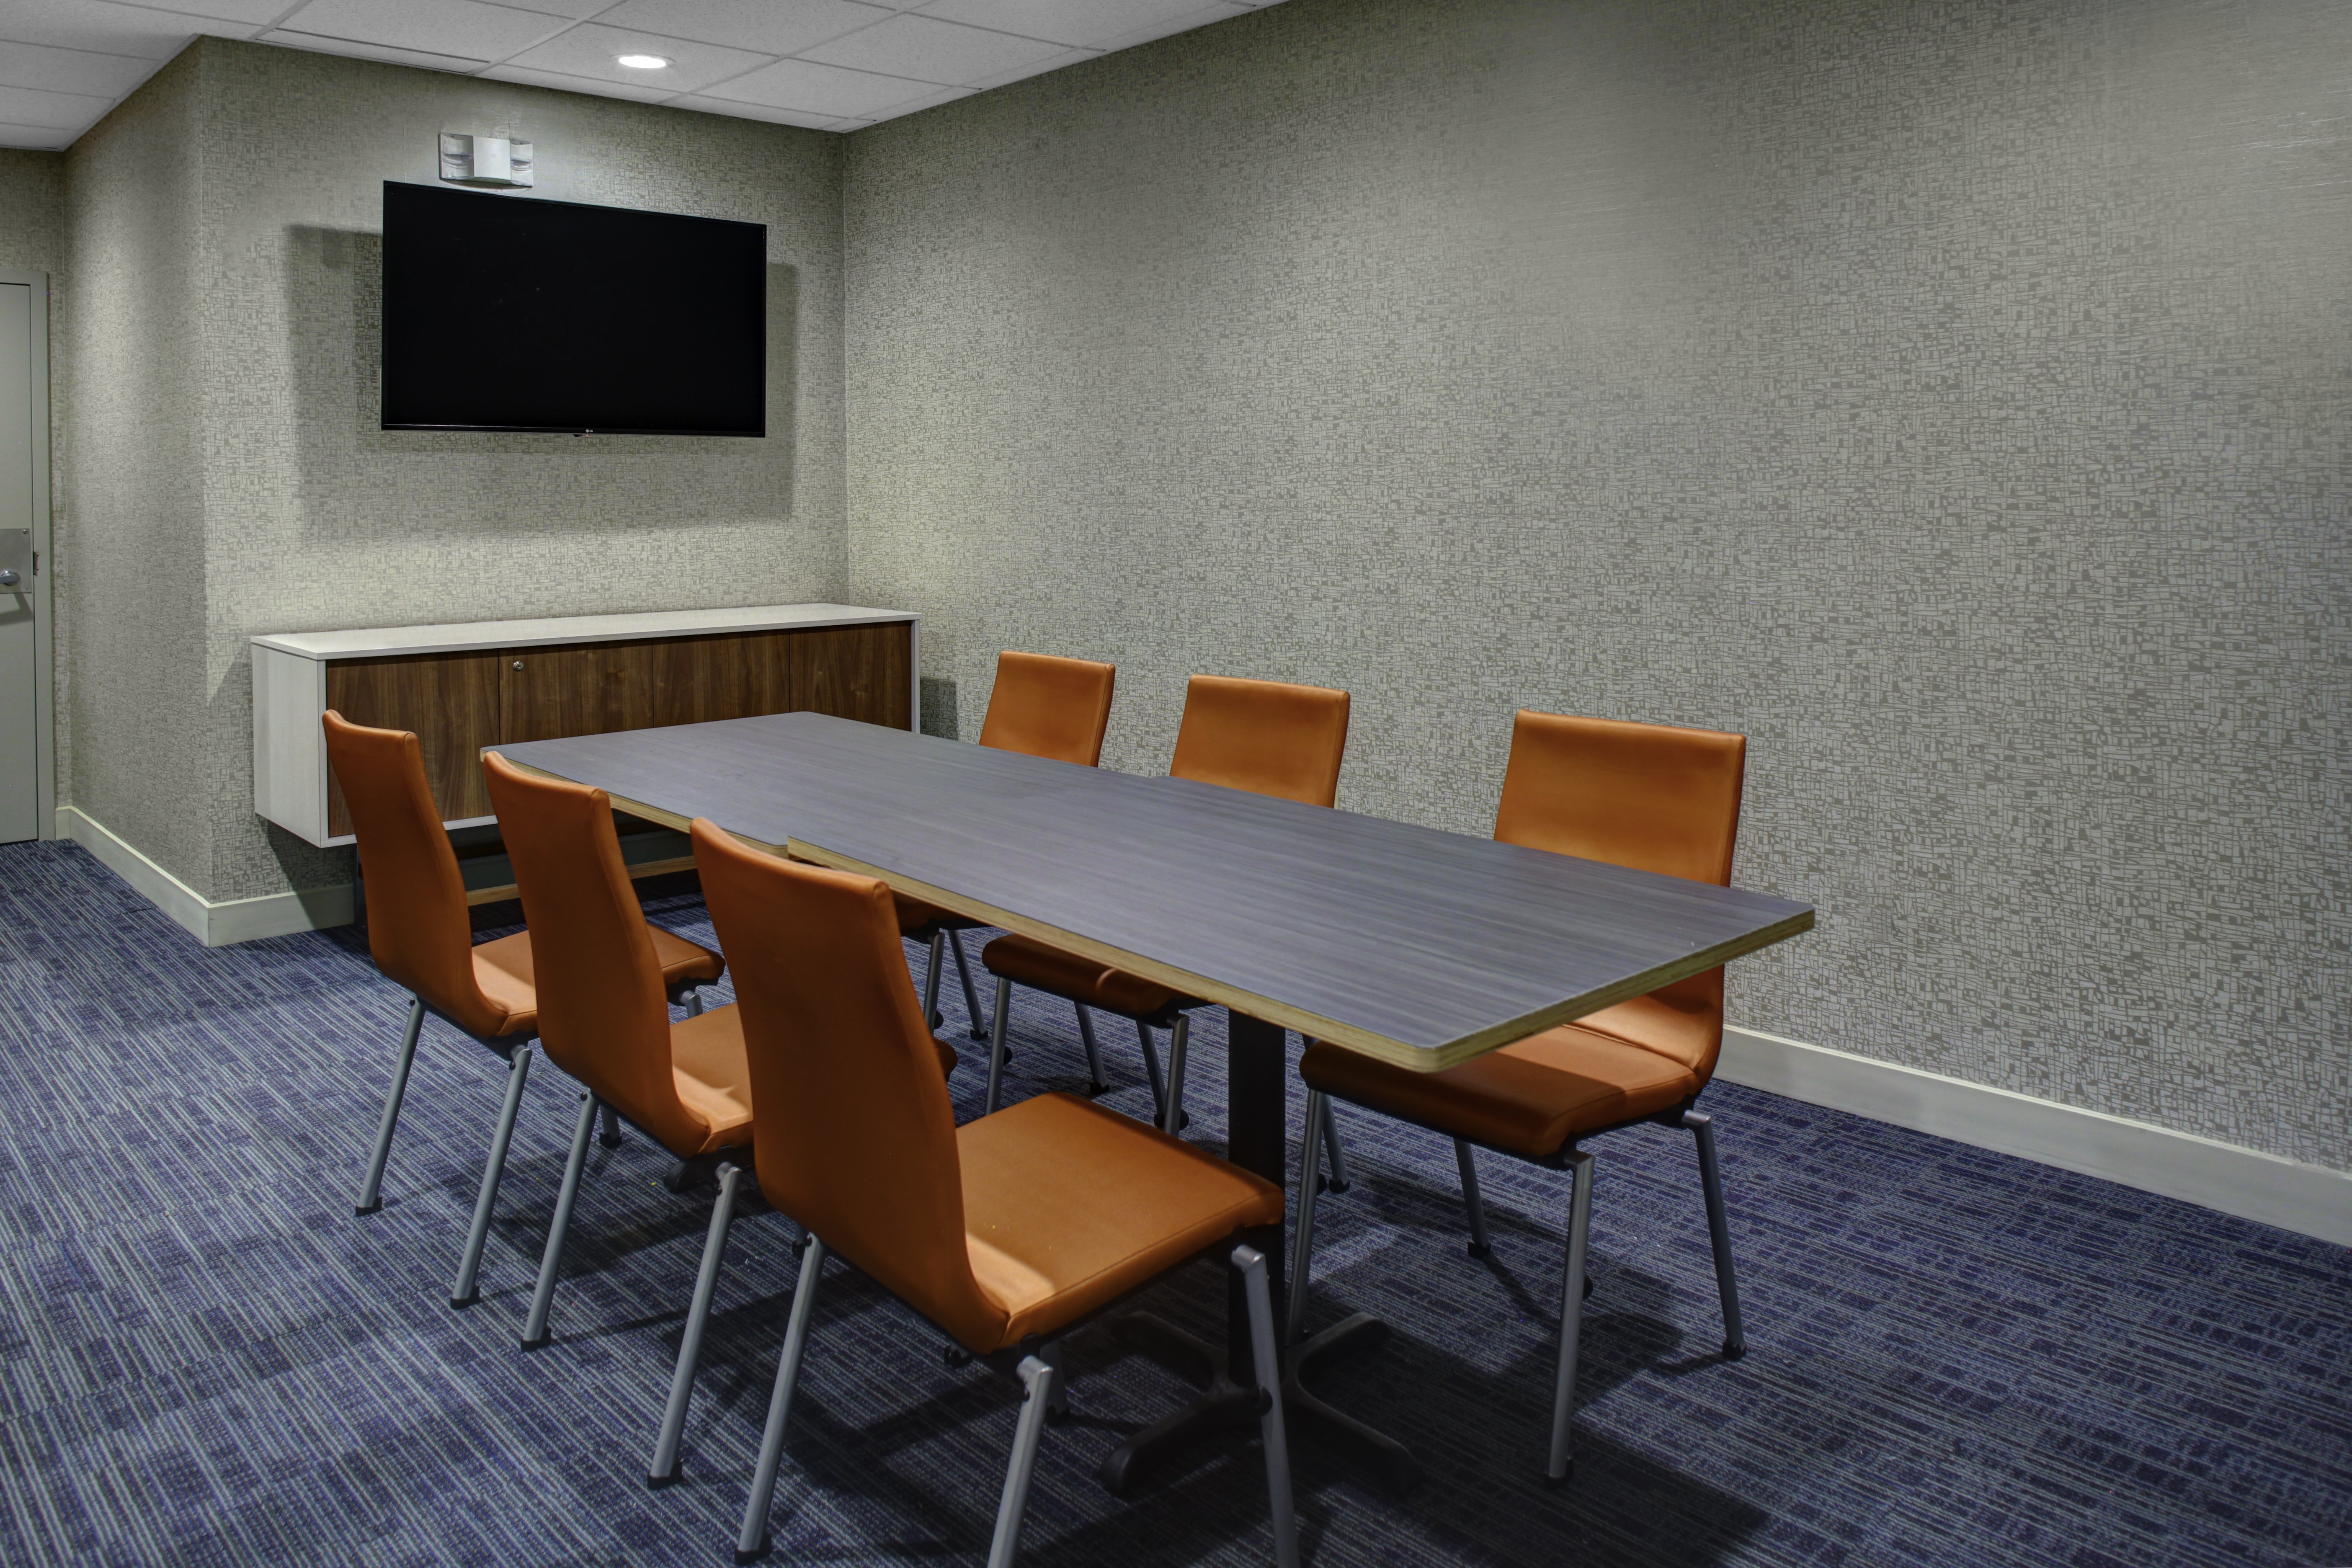 Be The Readiest and Book Your Next Meeting in Our Meeting Room!